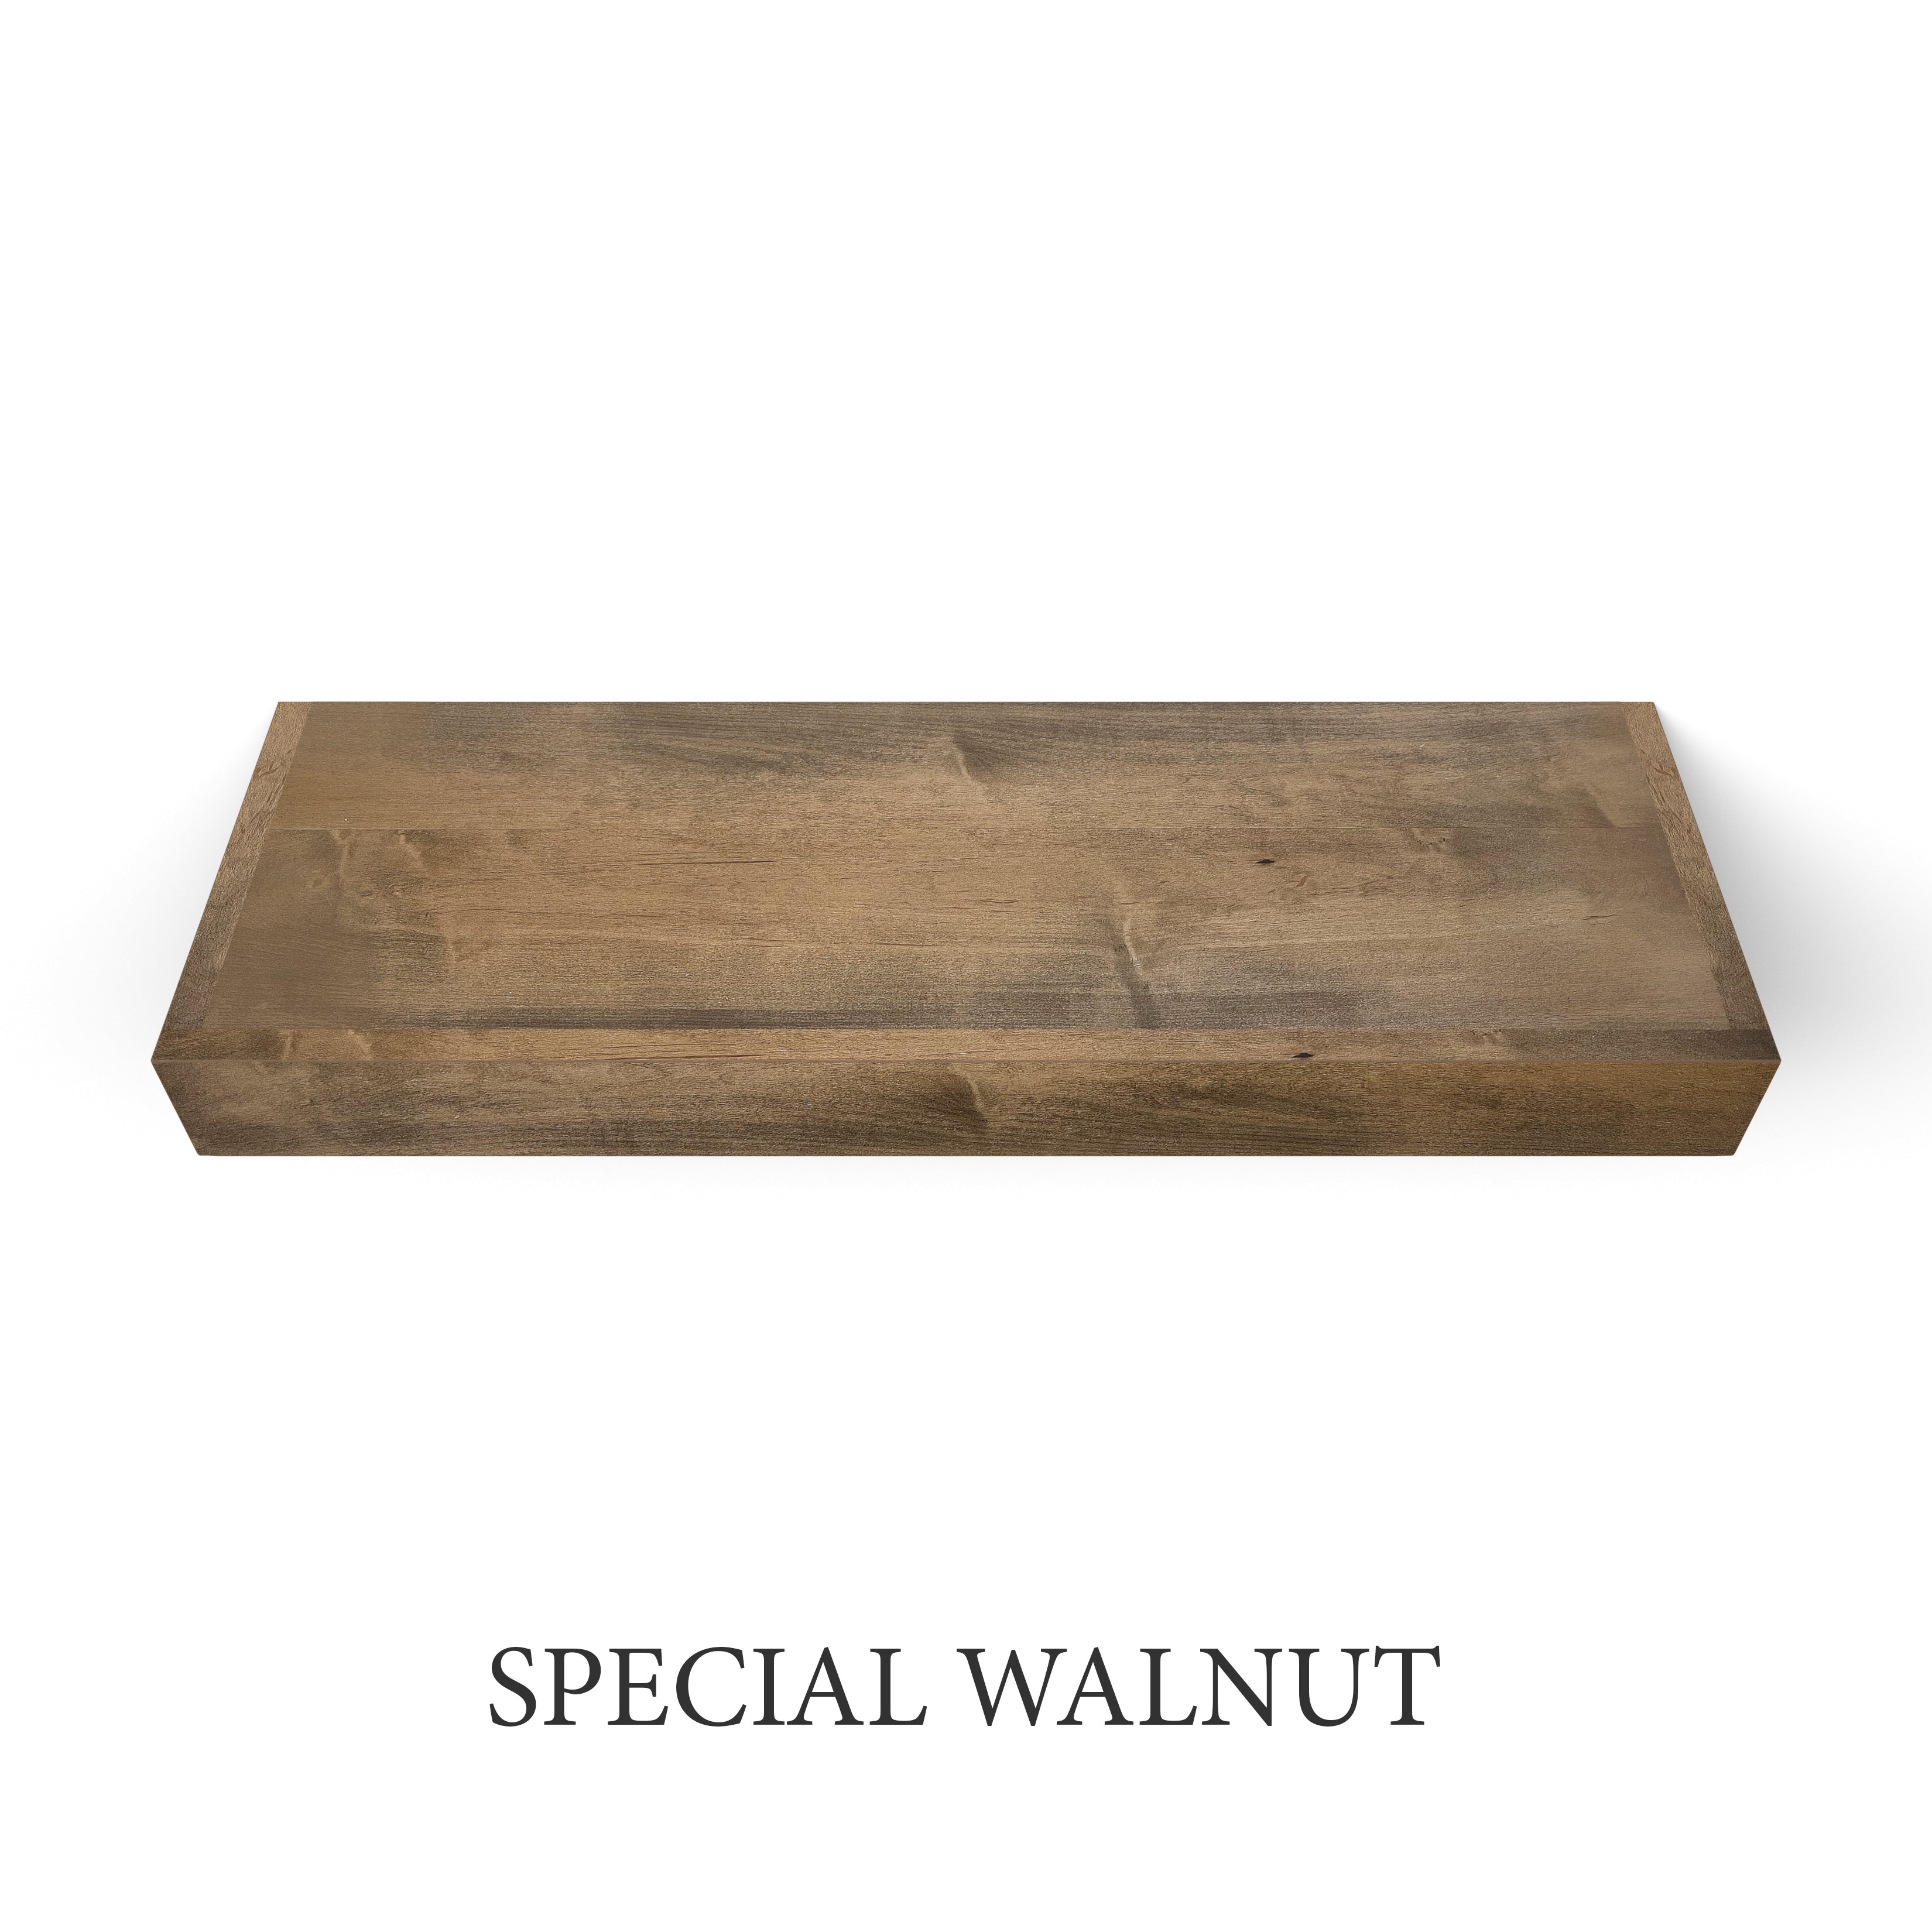 Maple 3 Inch Thick Floating Shelf